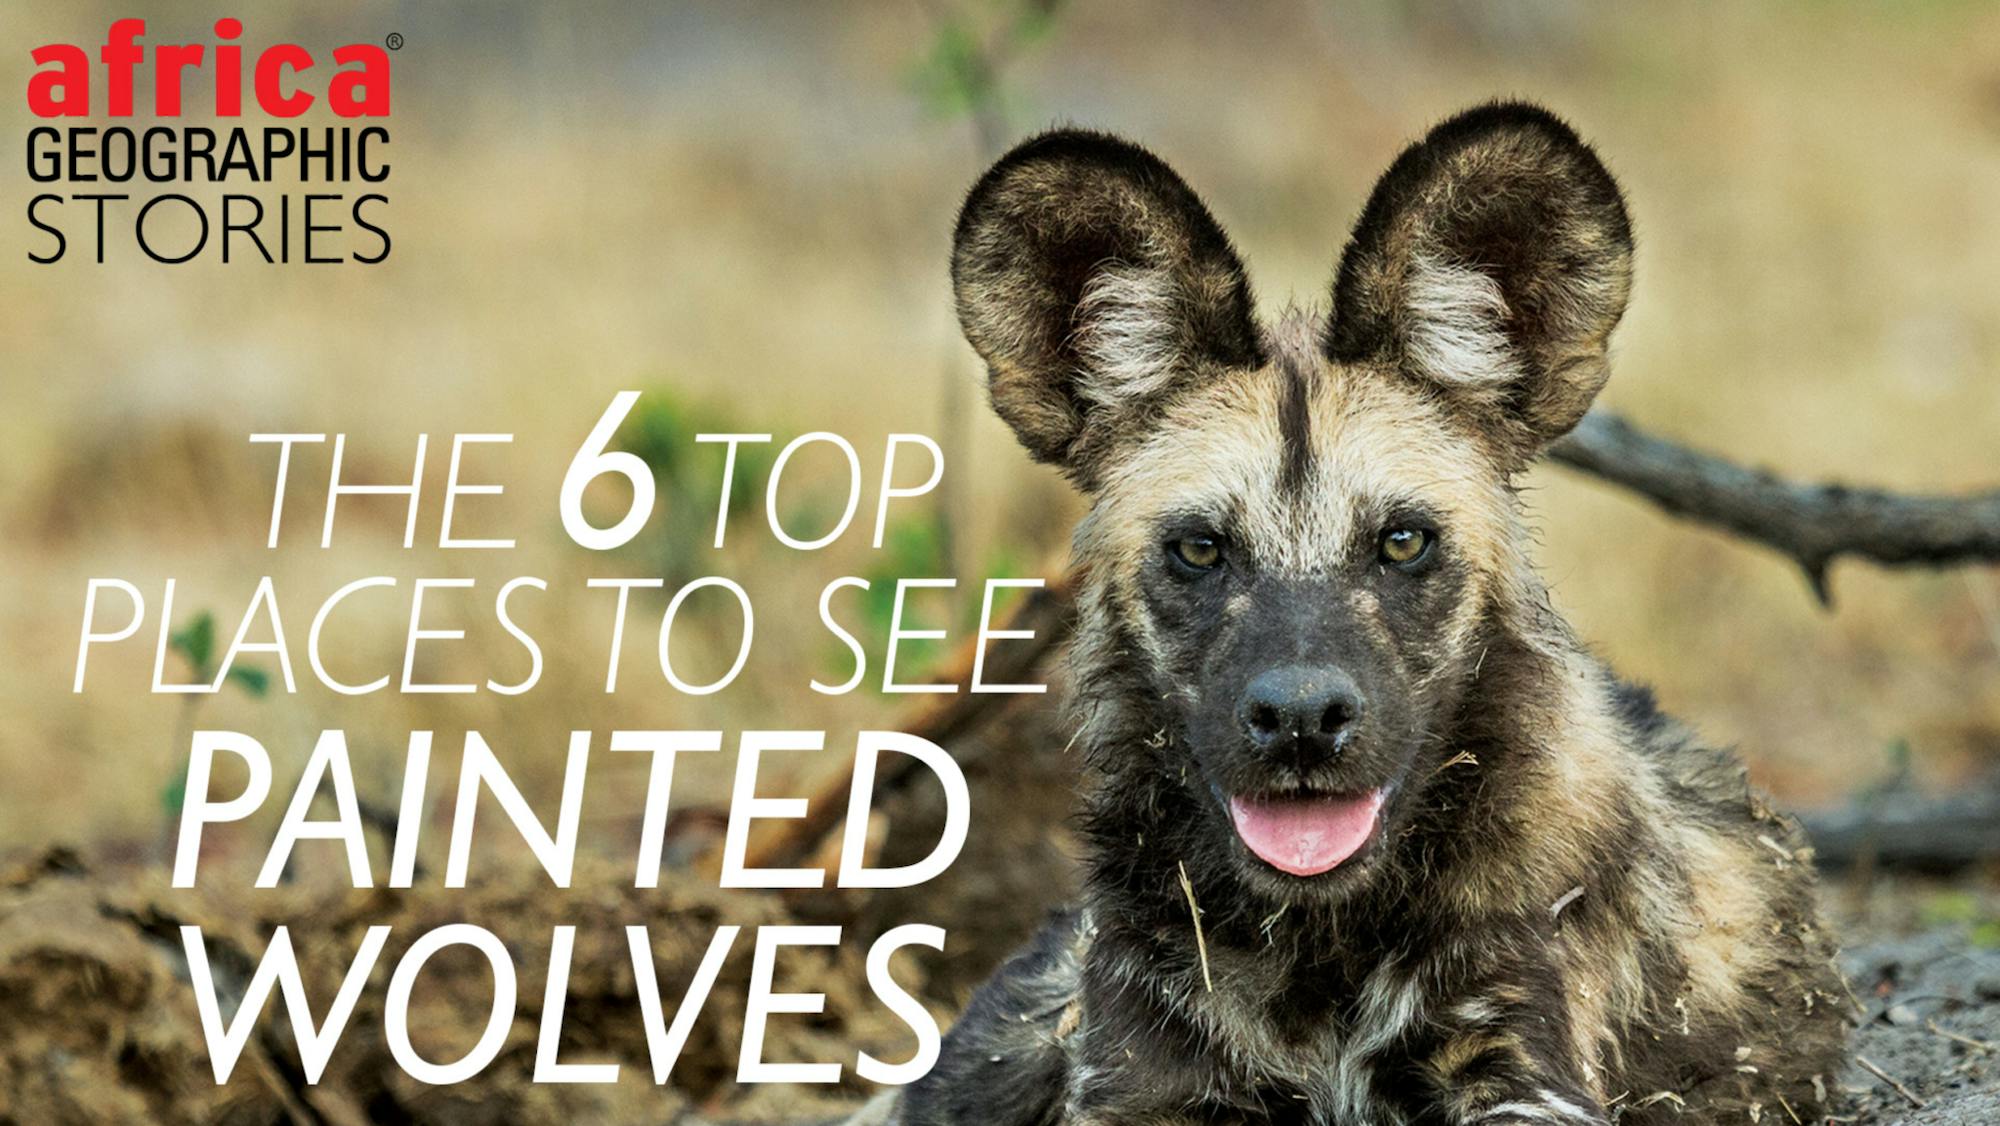 Africa Geographic Stories: The 6 Top Places To See Painted Wolves